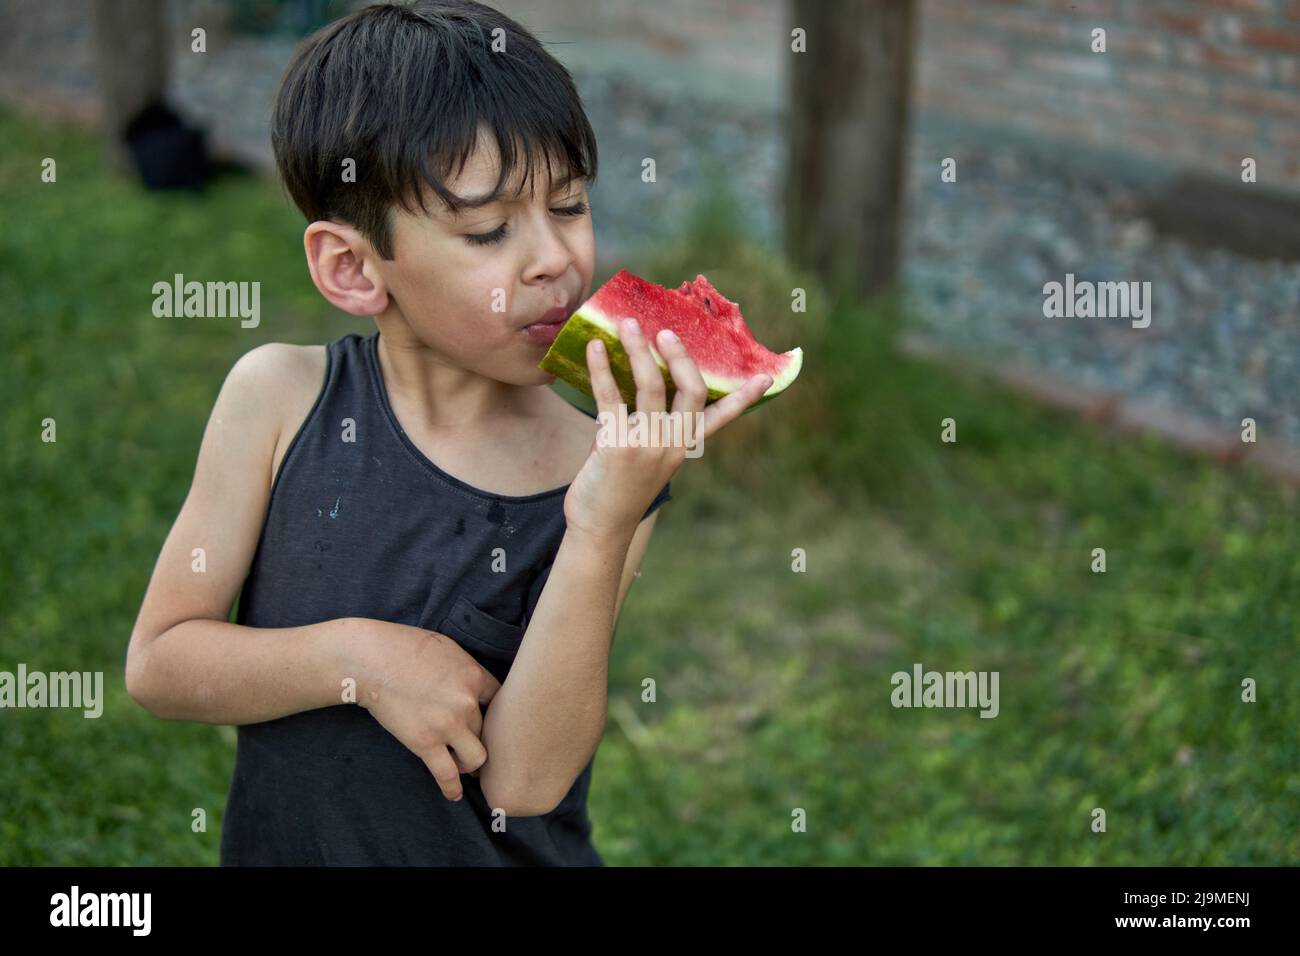 brown latino boy eating watermelon in the garden on a summer afternoon. healthy childhood habit. Selective focus and copy space. Stock Photo